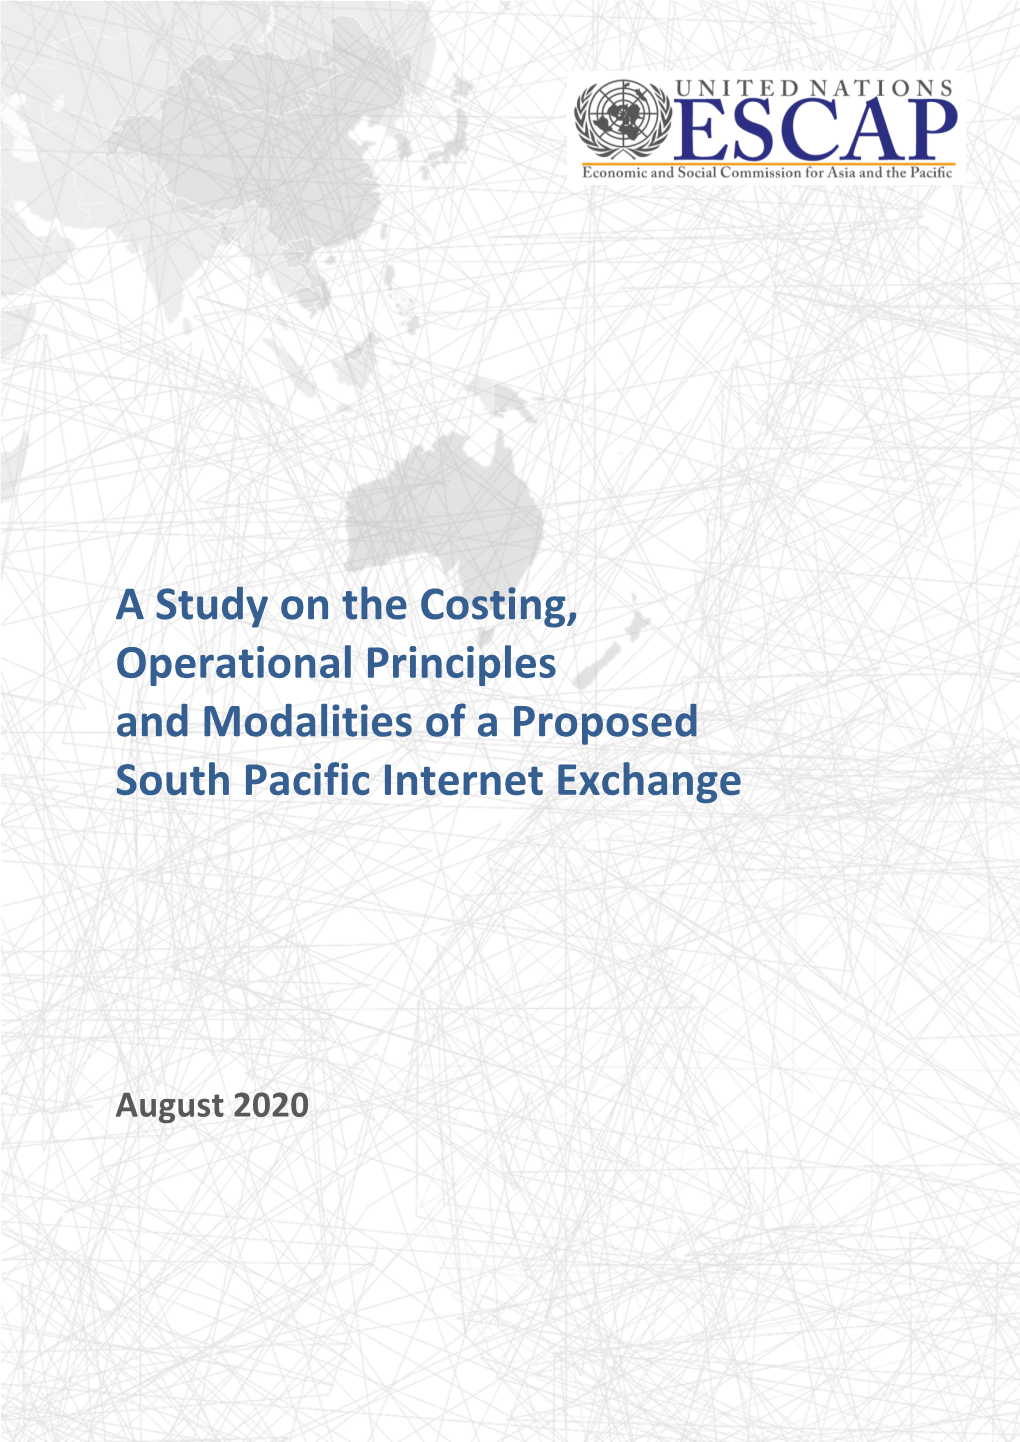 A Study on the Costing, Operational Principles and Modalities of a Proposed South Pacific Internet Exchange